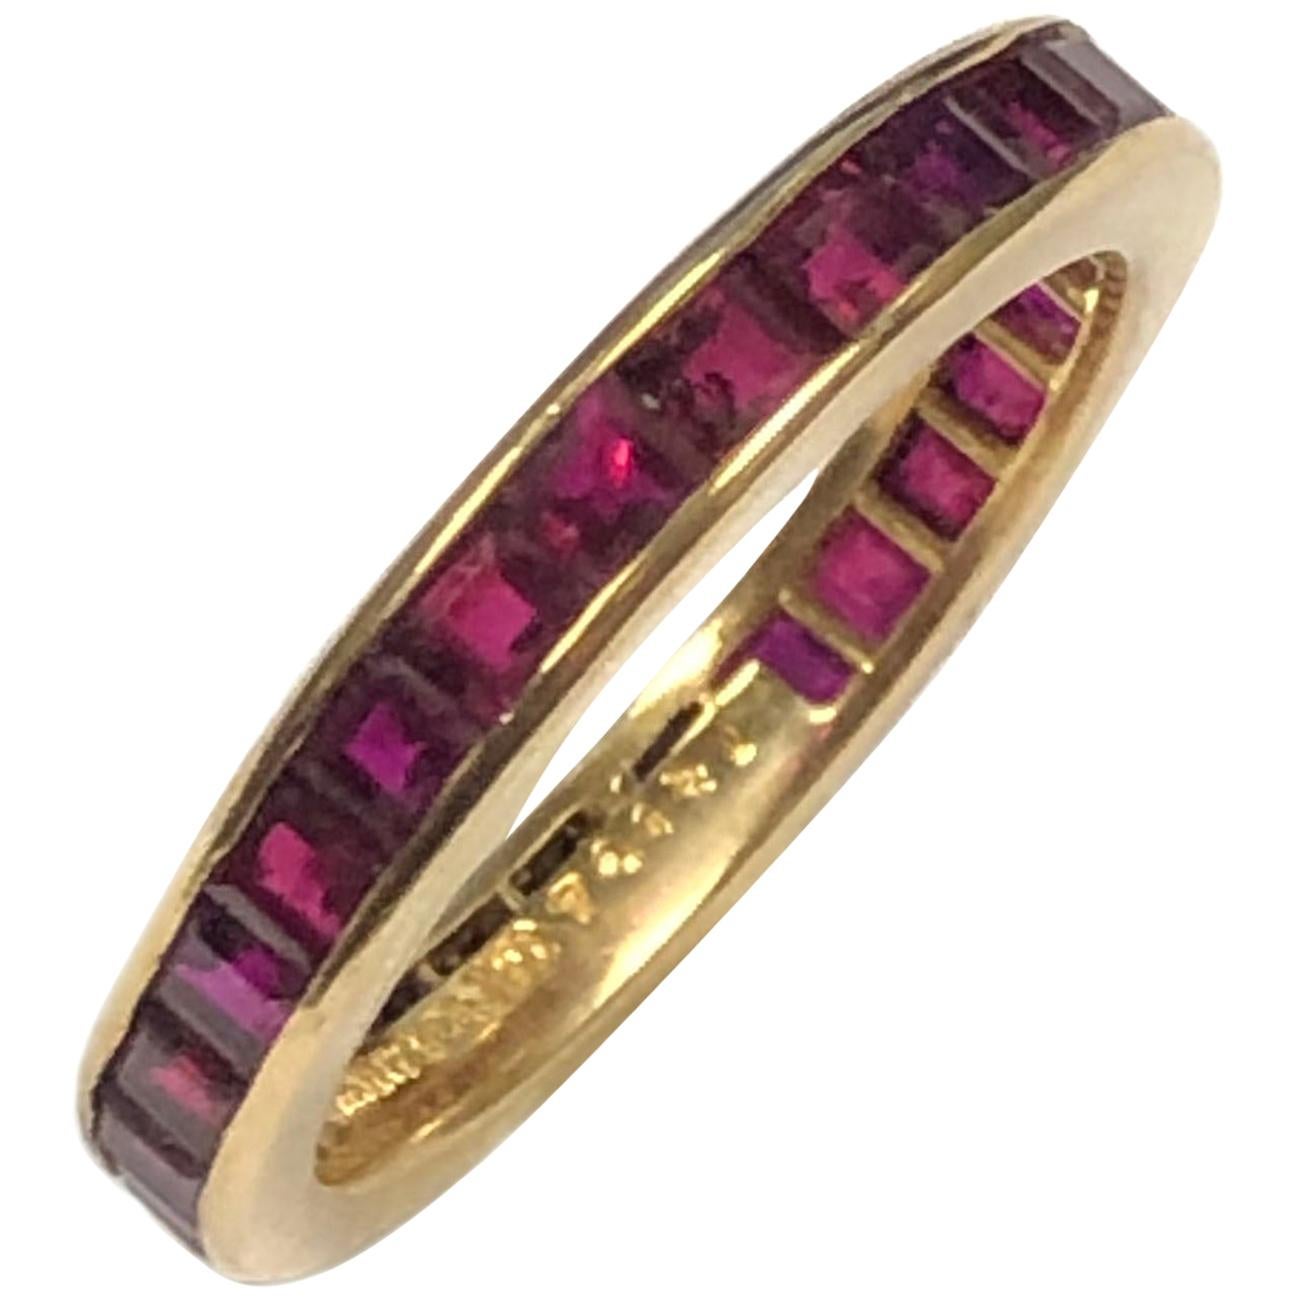 Tiffany & Co. Yellow Gold and Ruby Eternity Band Ring